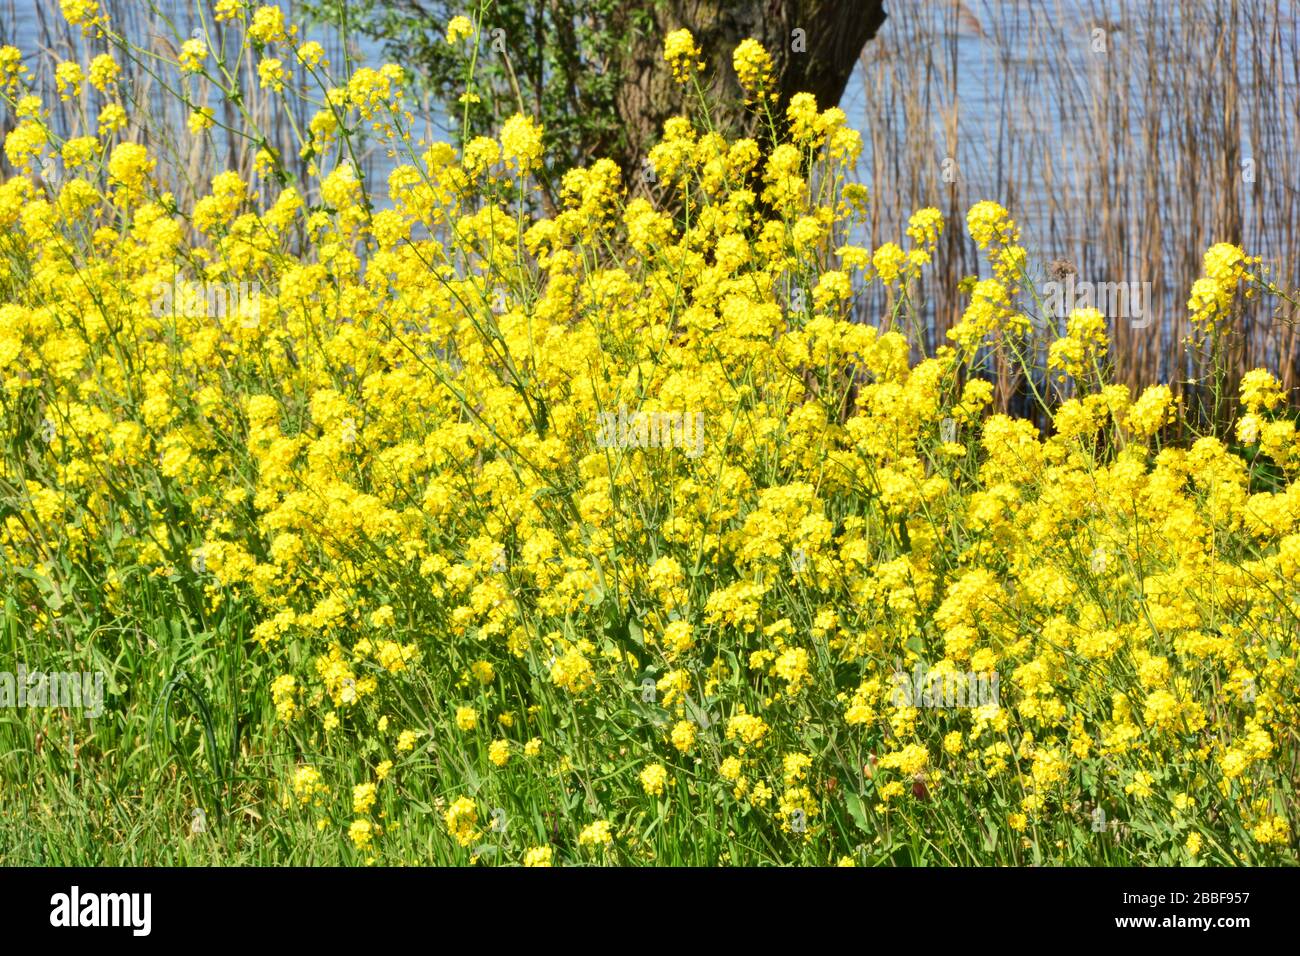 Close up view bright yellow flowers next to reed beds in Biesbosch National Park; one of the last extensive areas of freshwater tidal wetlands in Nort Stock Photo